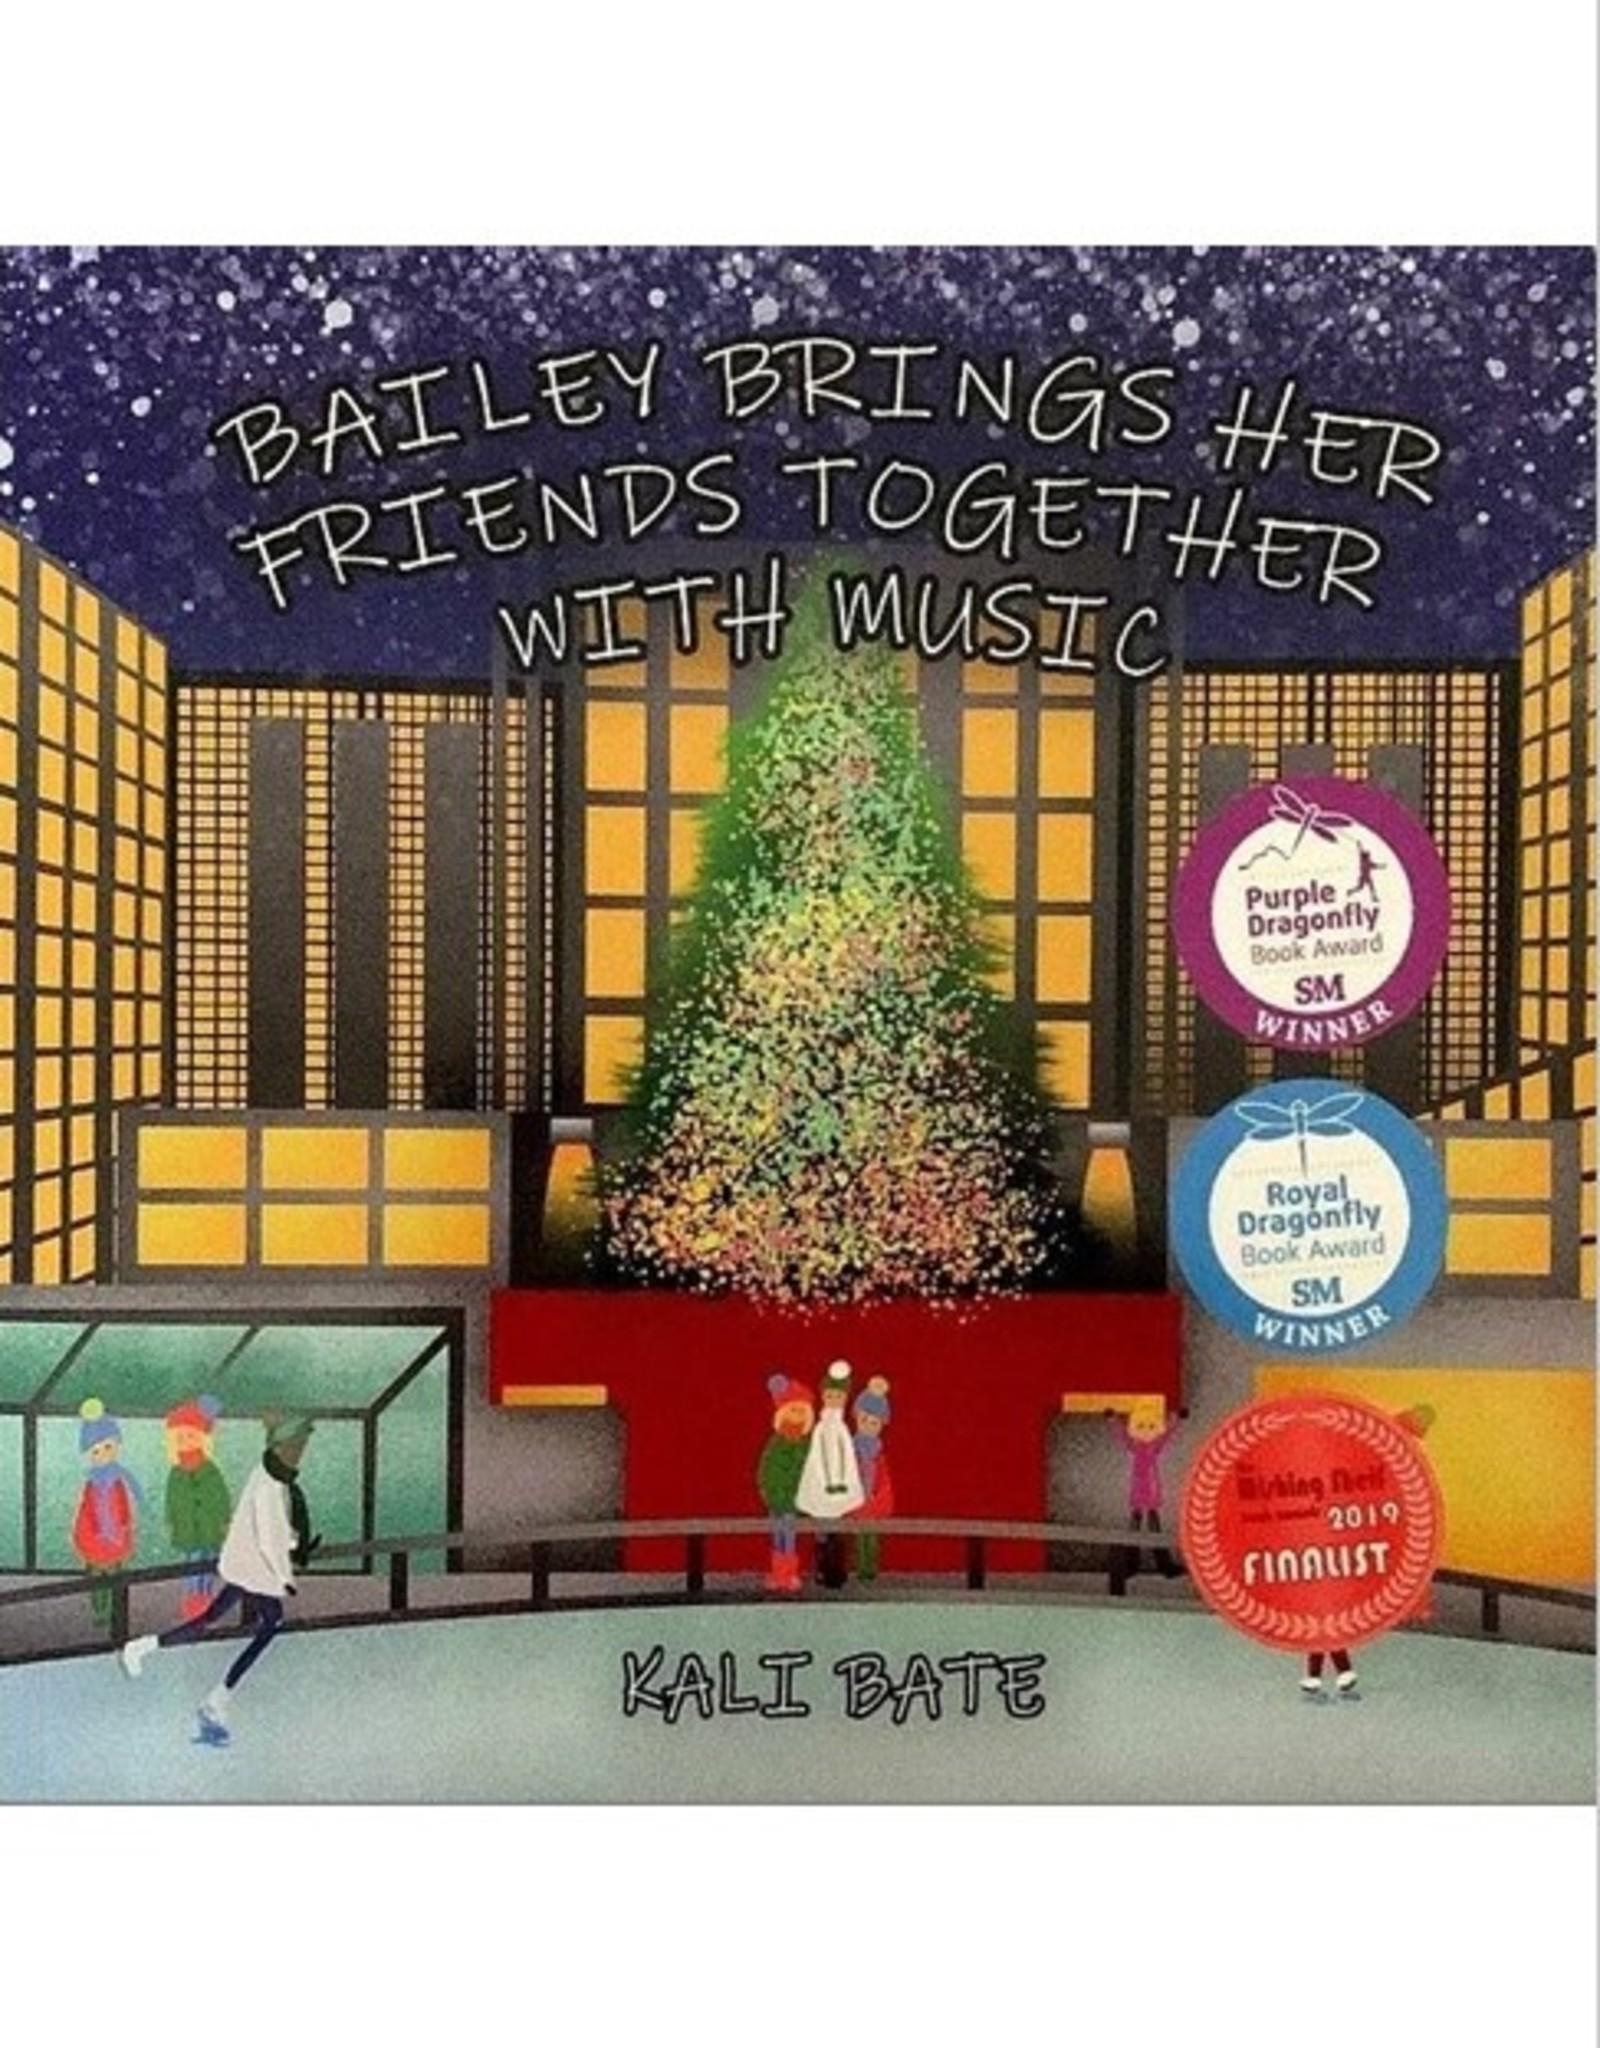 Bailey Brings Her Friends Together with Music